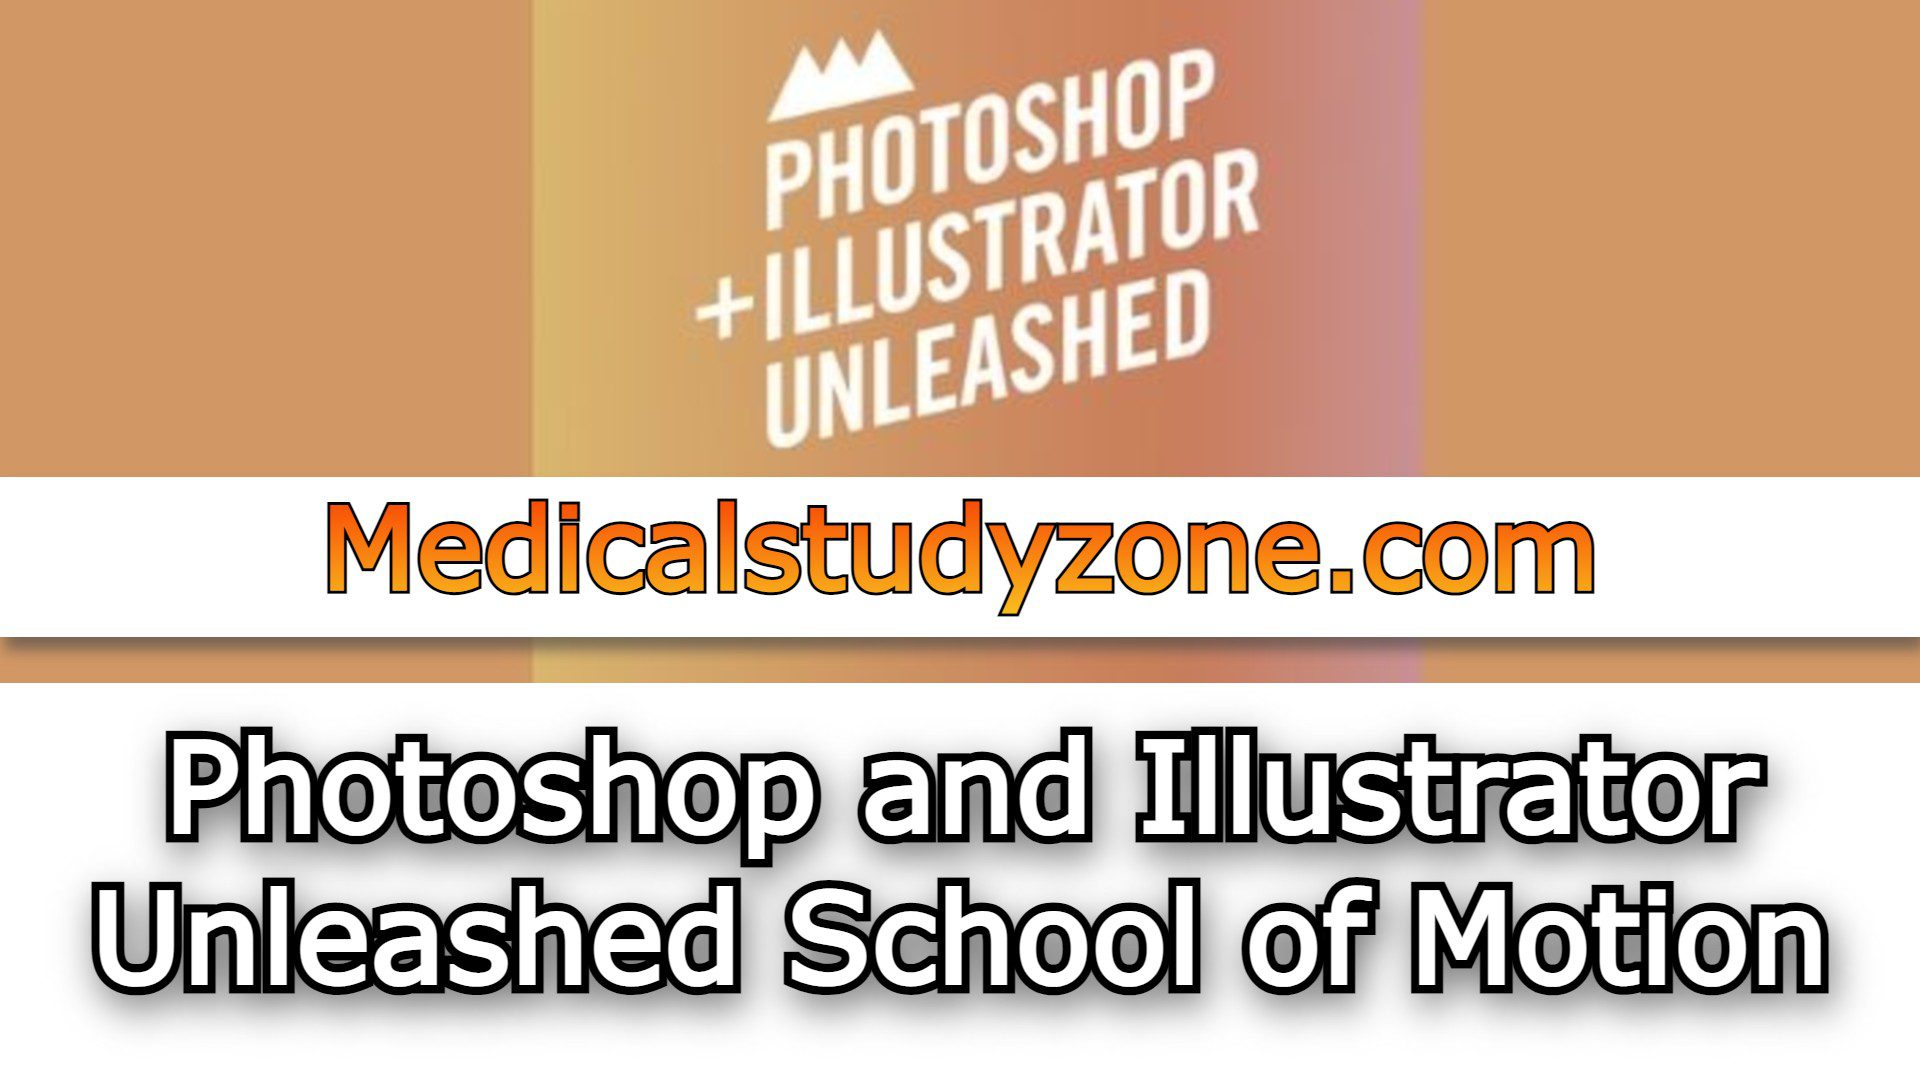 Photoshop and Illustrator Unleashed 2021 - School of Motion Free Download